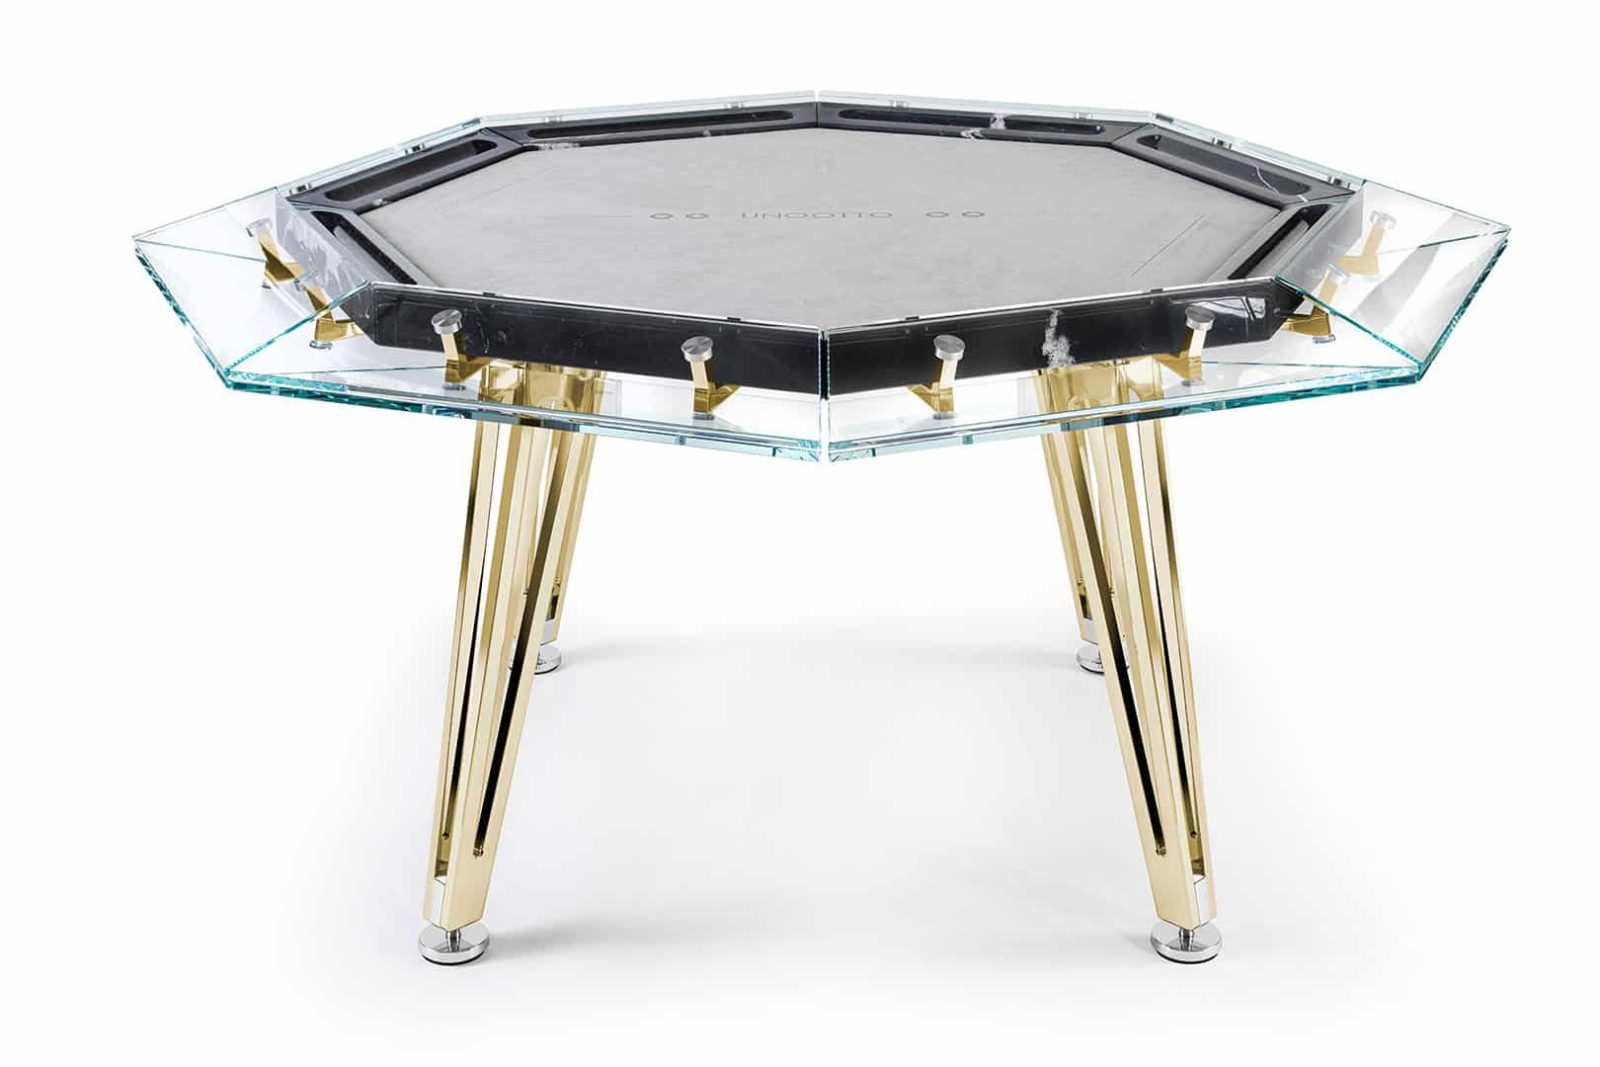 Unootto Poker Table